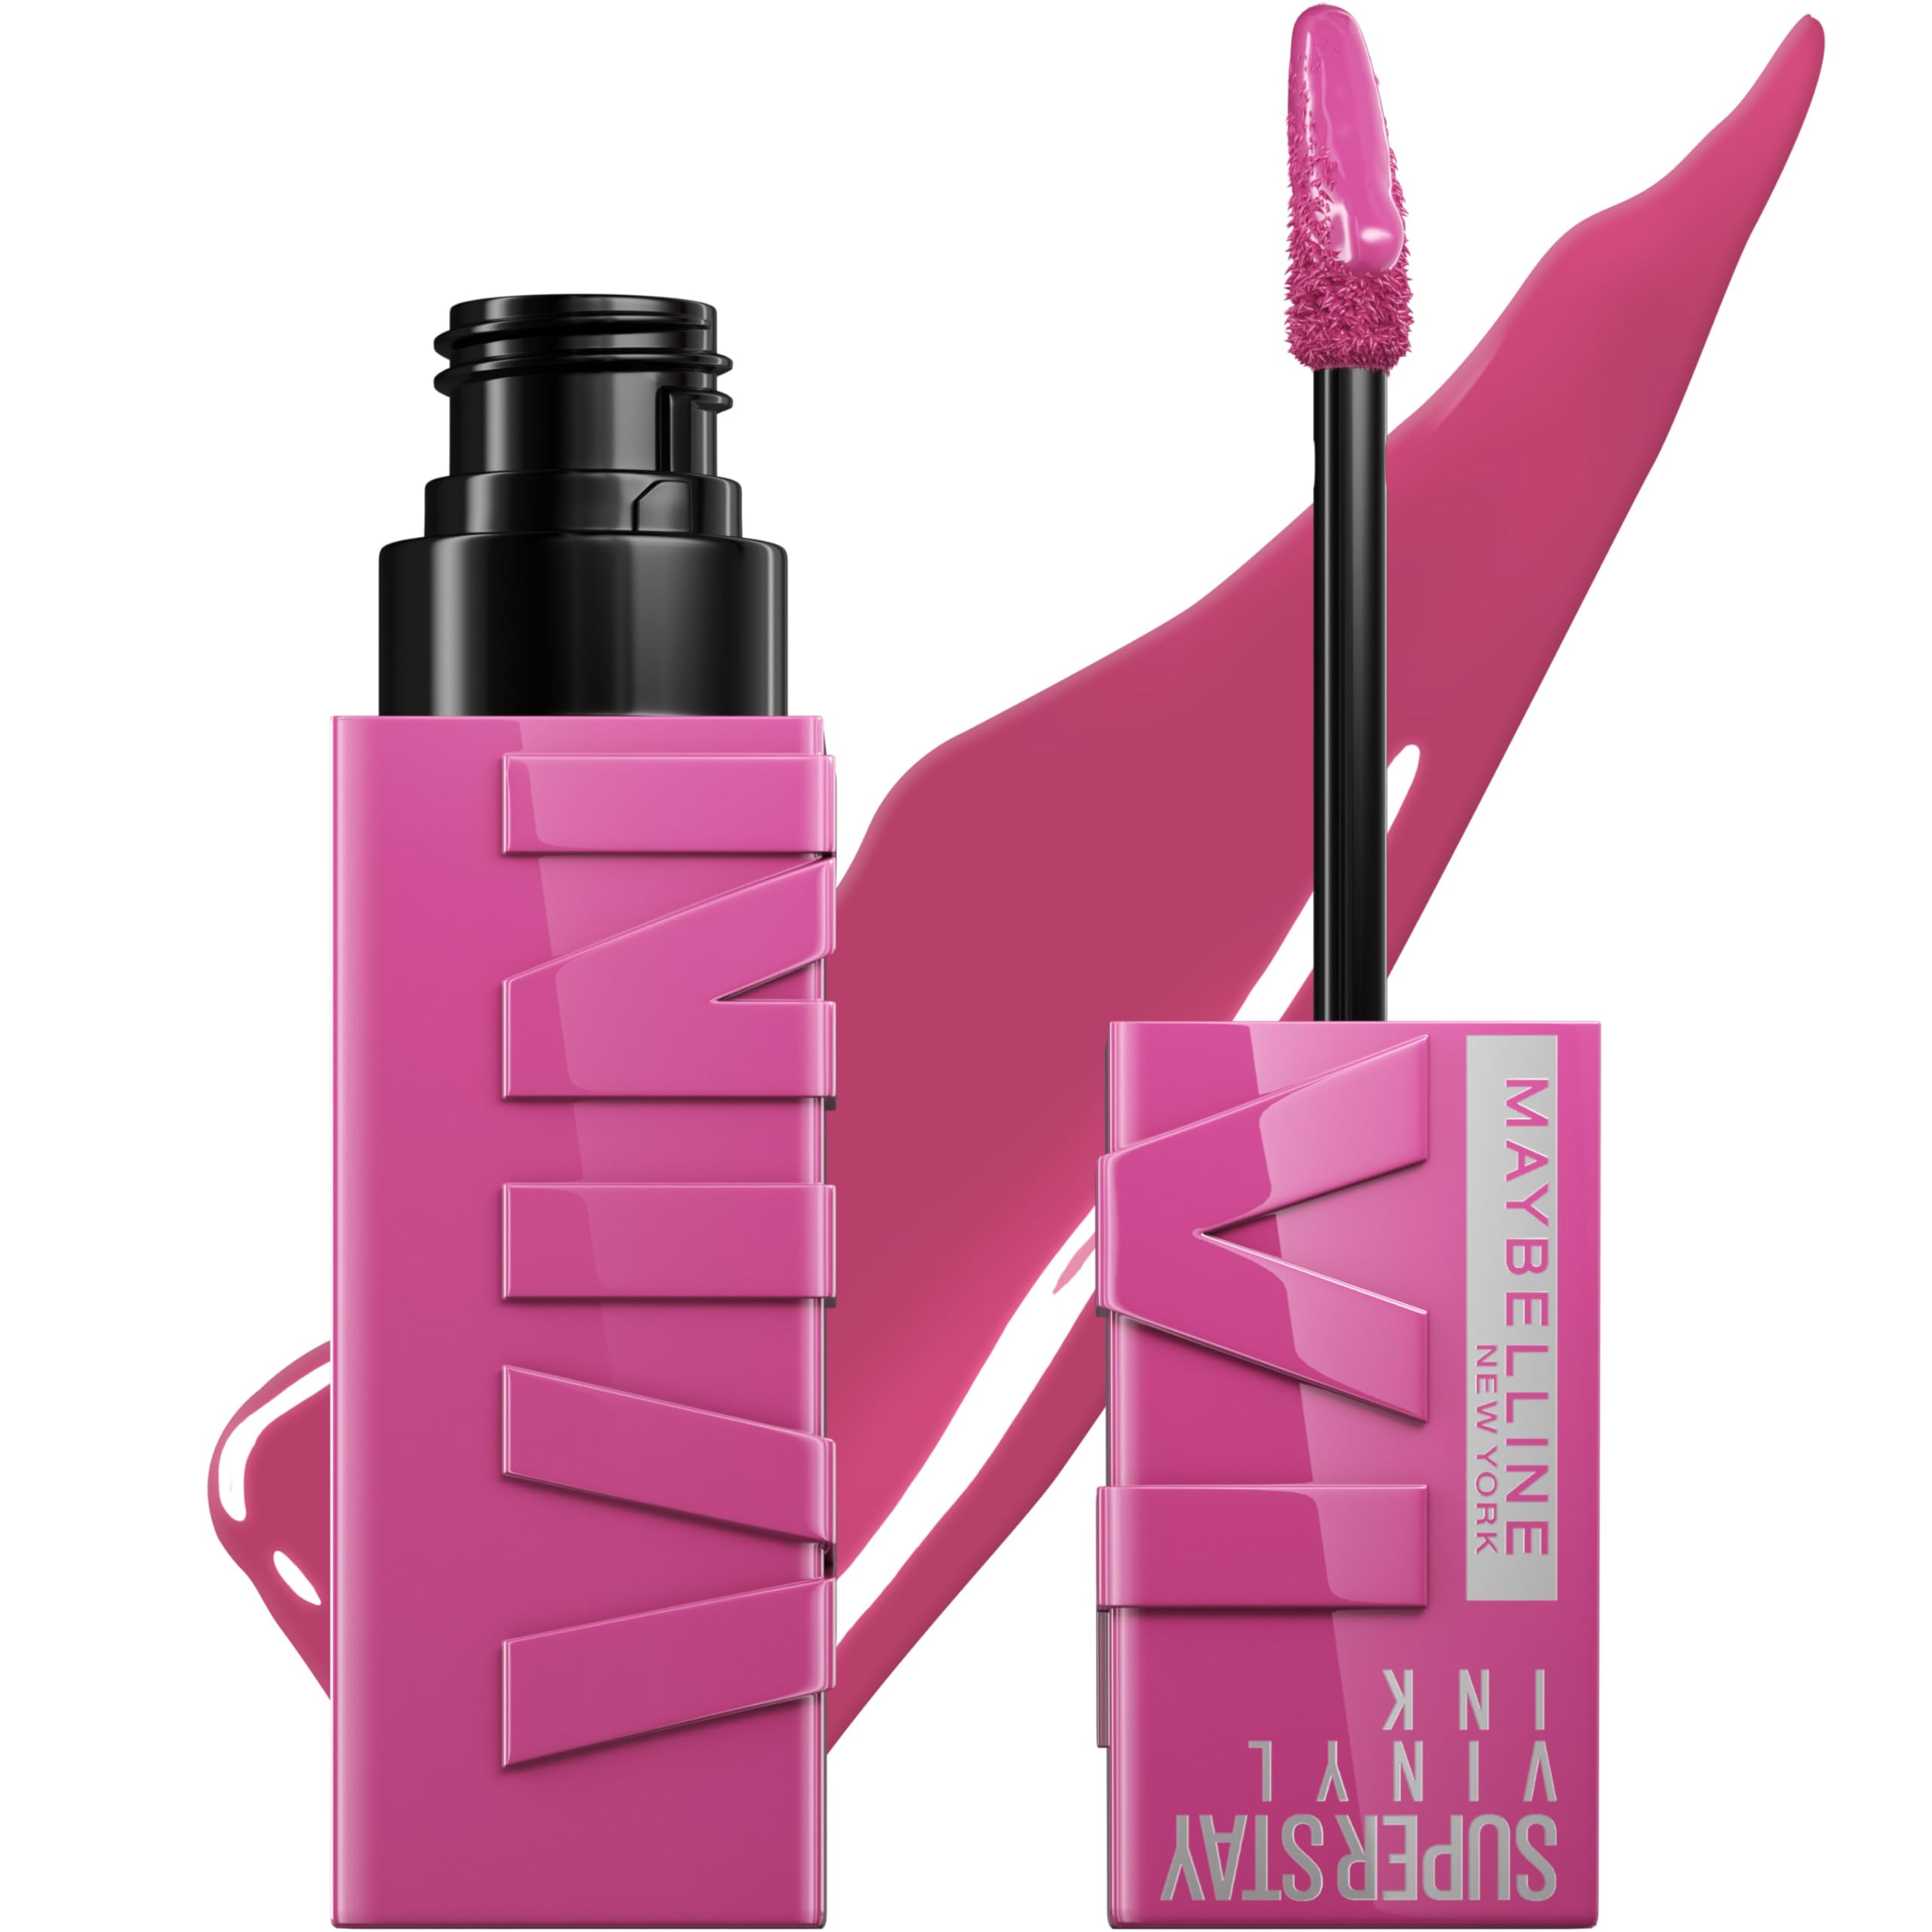 MAYBELLINE Super Stay Vinyl Ink Longwear No-Budge Liquid Lipcolor Make Up, Highly Pigmented Color and Instant Shine, Edgy, 1 Count